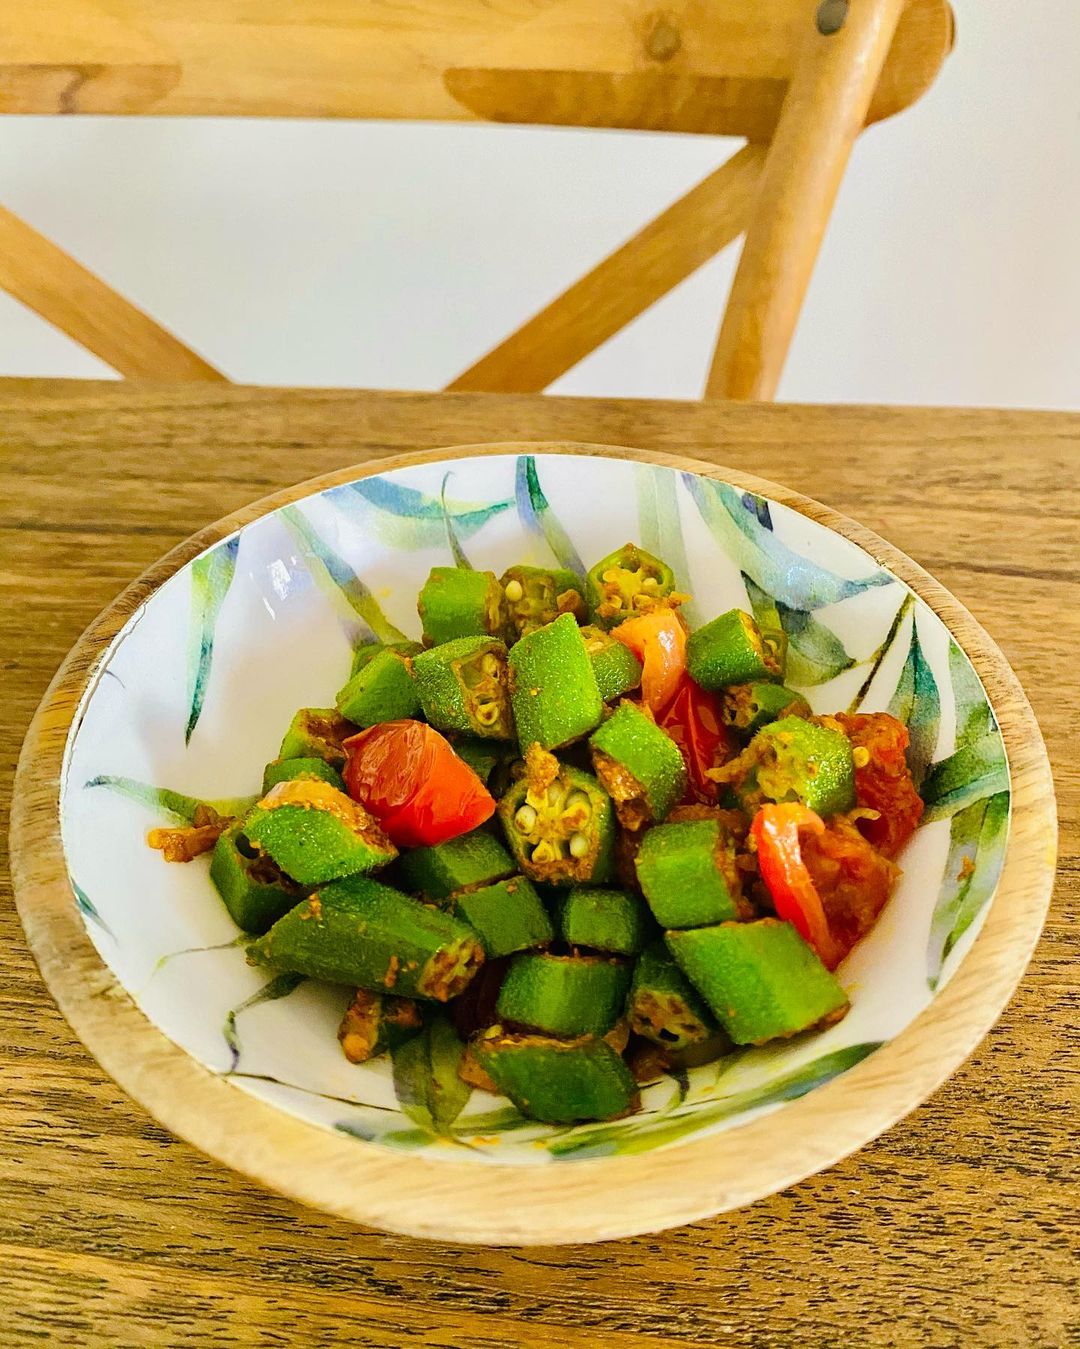 A new recipe to try this weekend! Cooking with Okra.